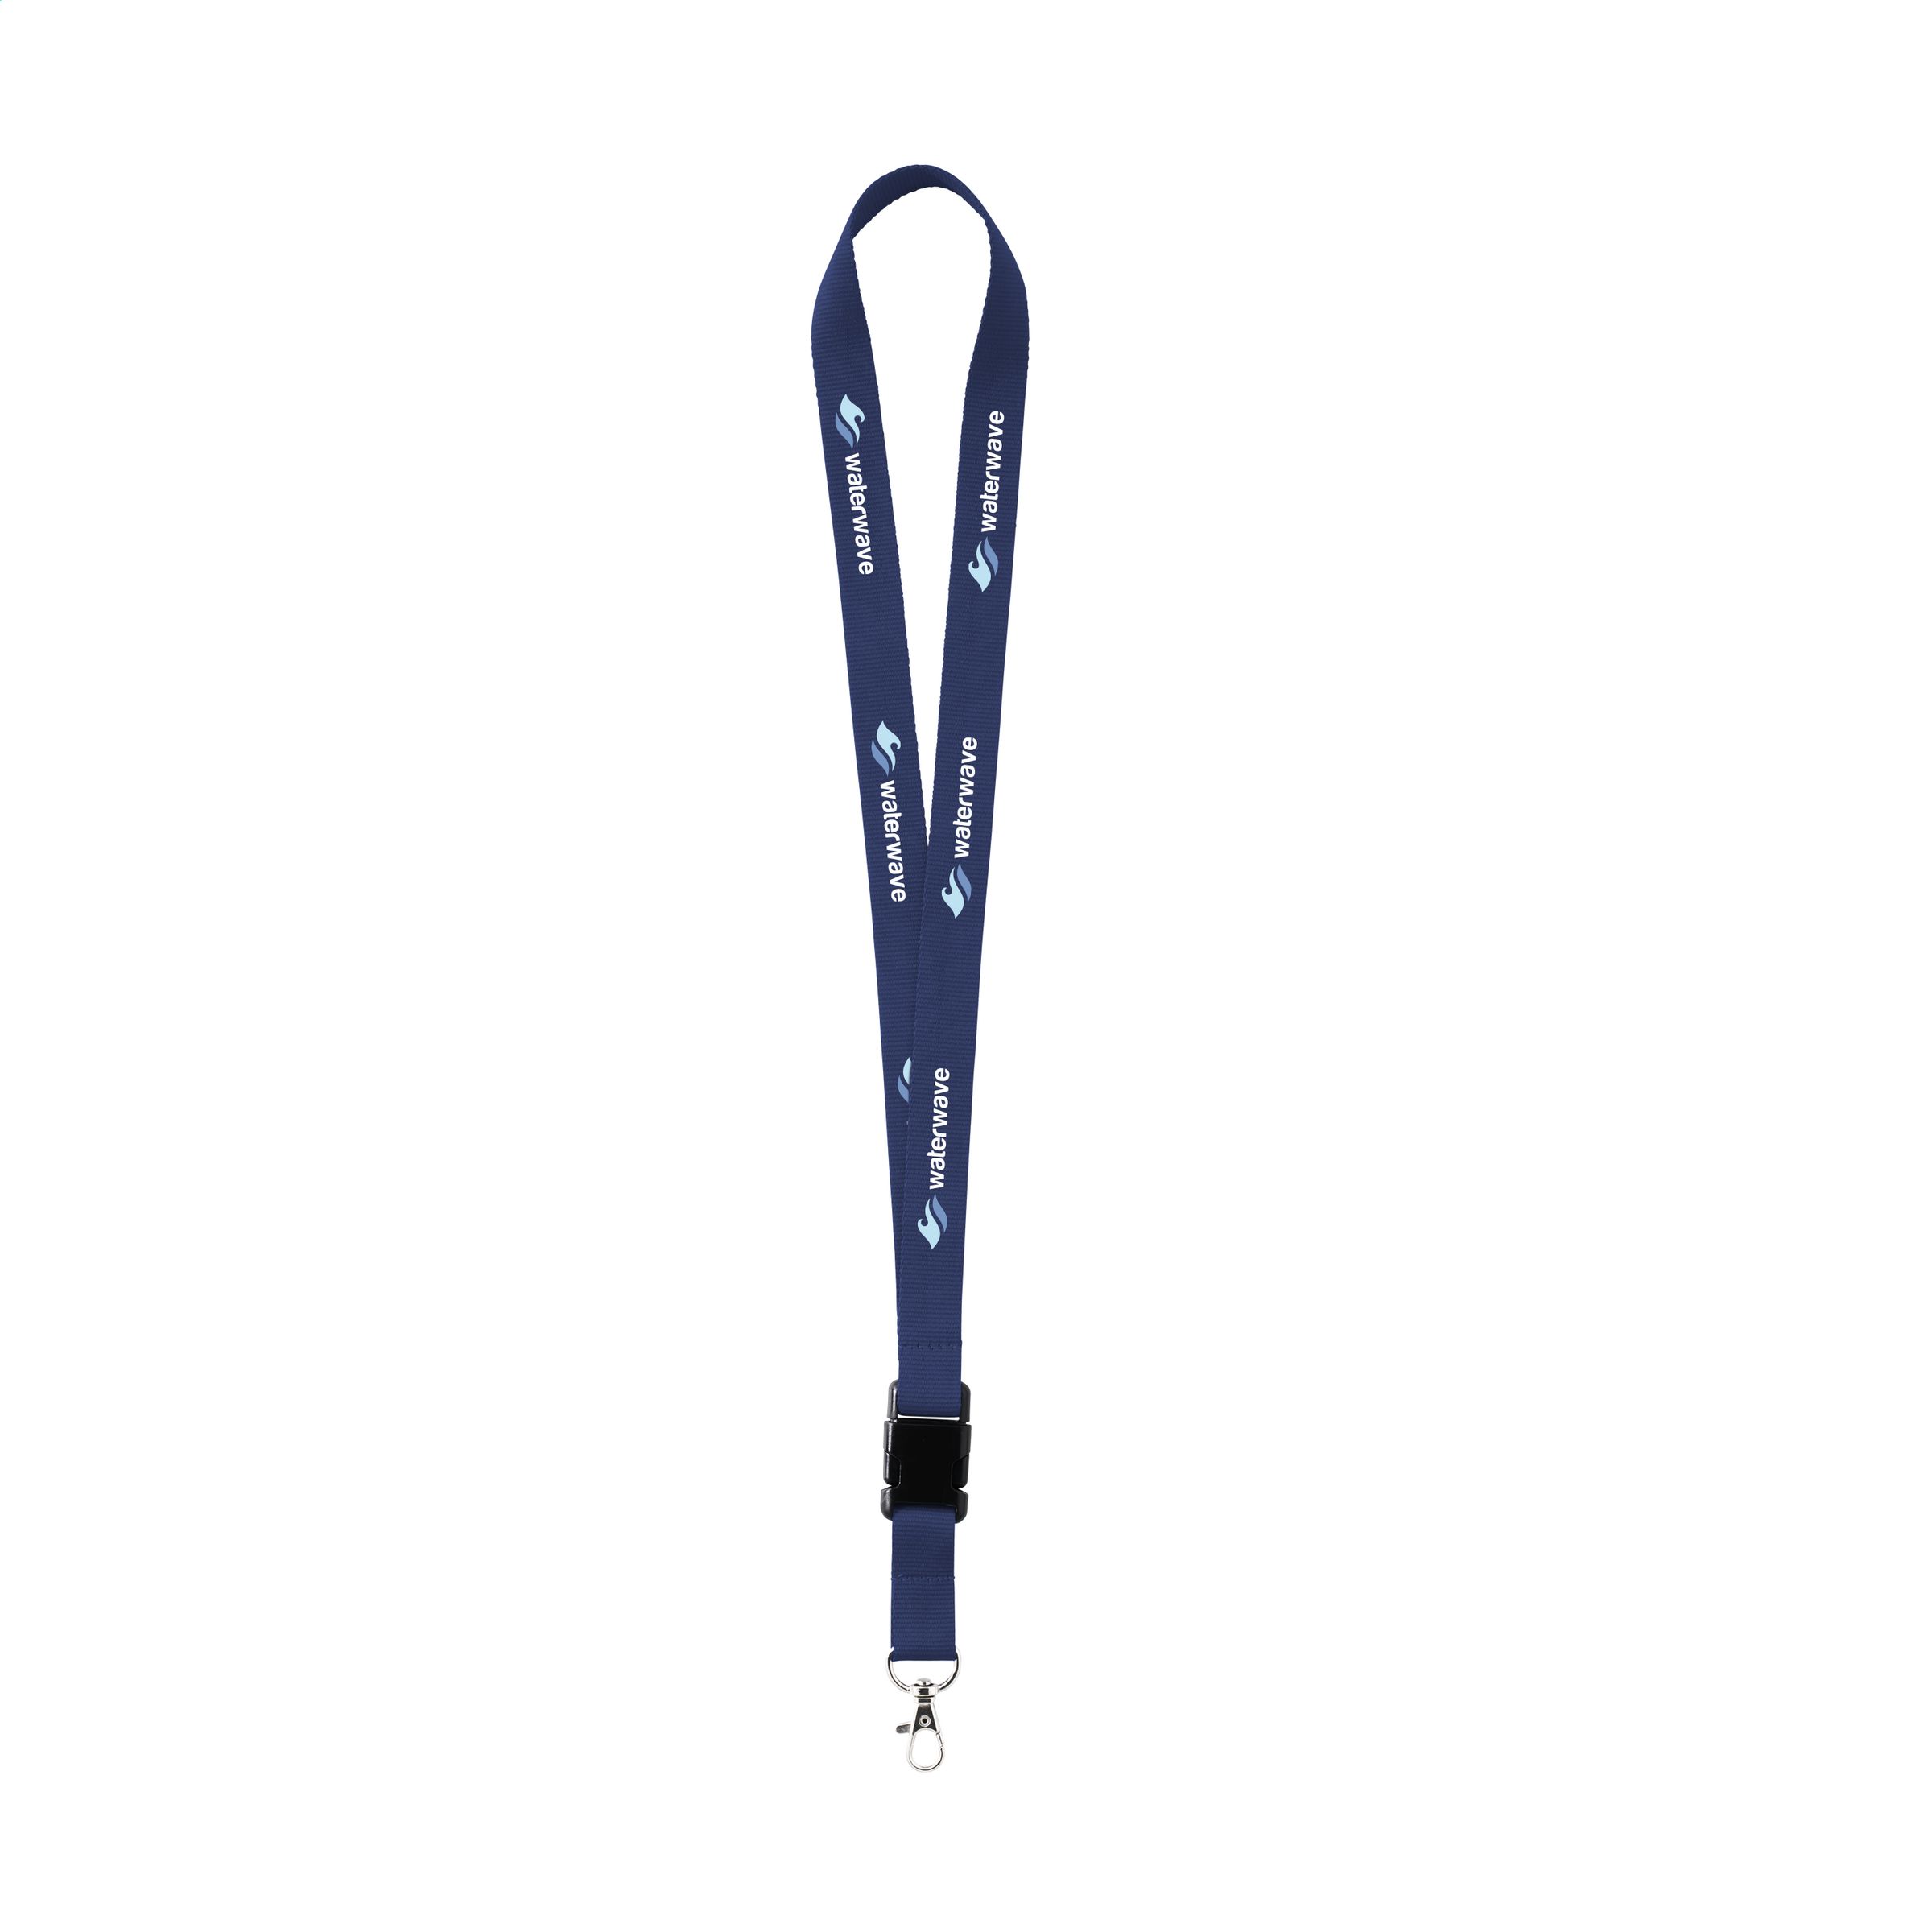 Polyester Lanyard with Detachable Lower Section - Ansty - Cotswold